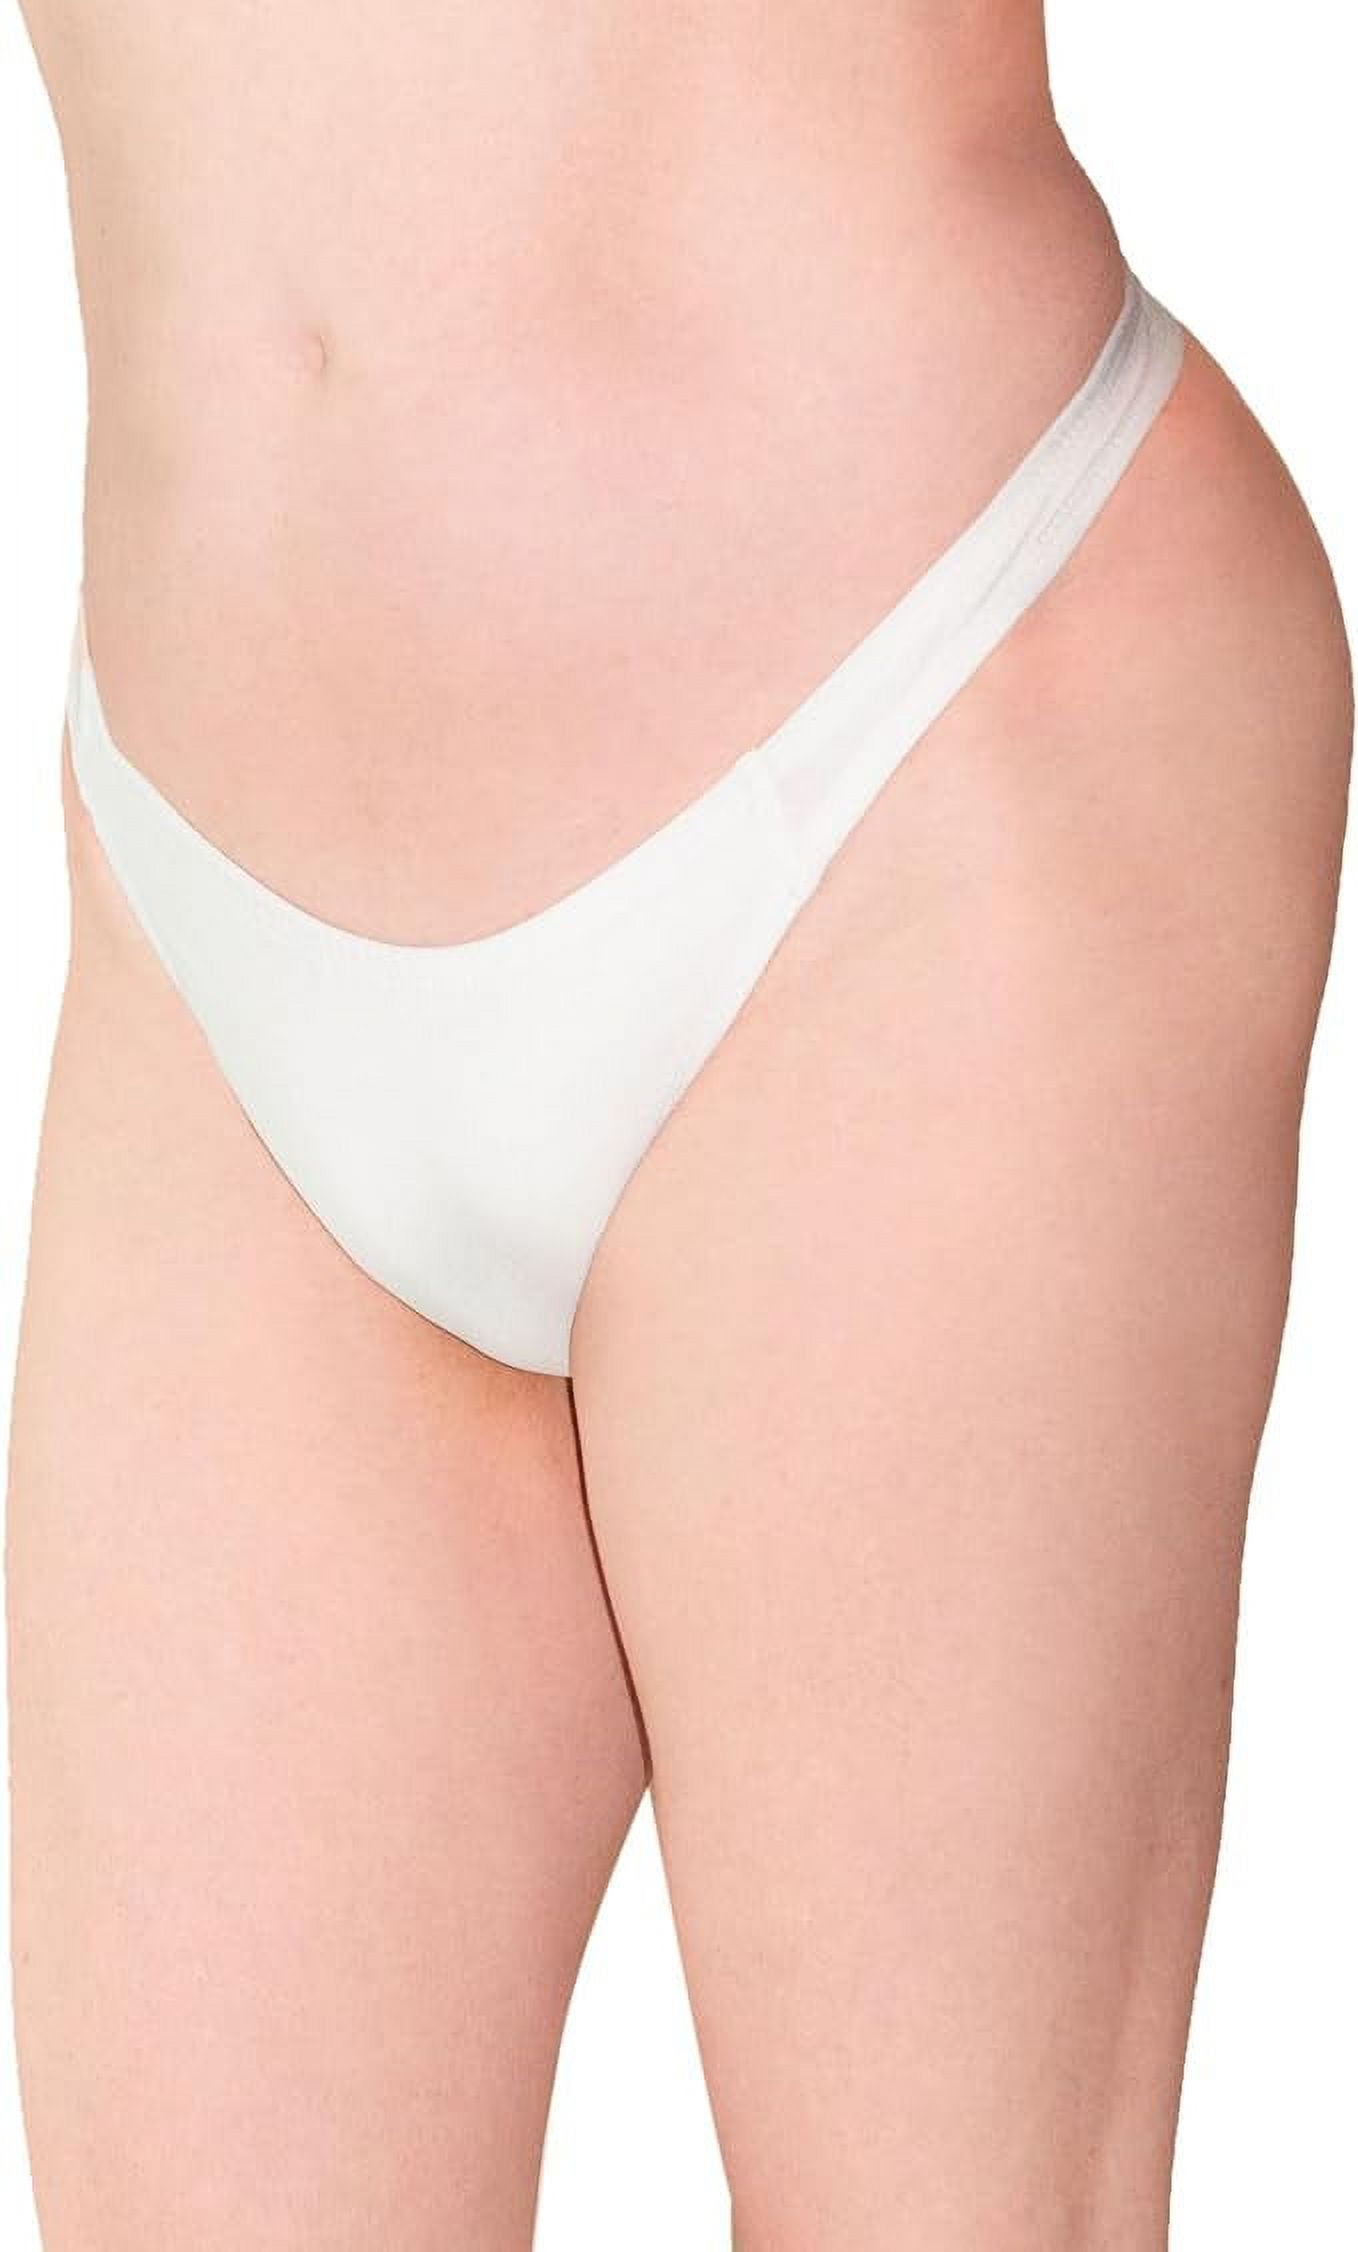 Glamour Boutique's Gaff Thong Underwear Male-to-Female Tucking Panties  (Medium, White) 